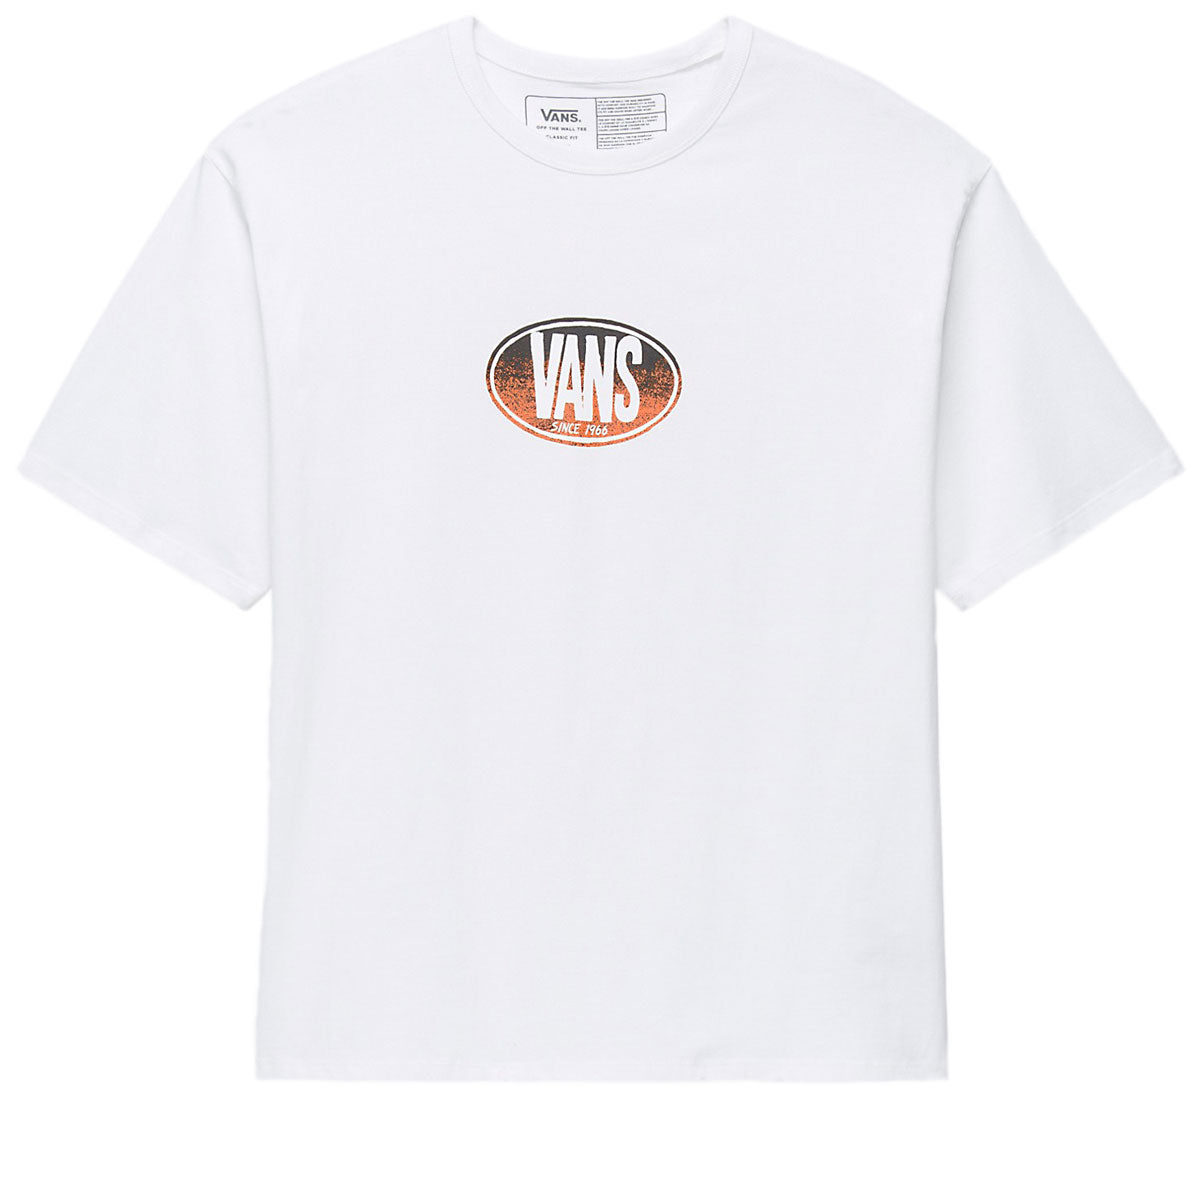 Vans Off The Wall Gradient Logo Loose T-Shirt - White image 1